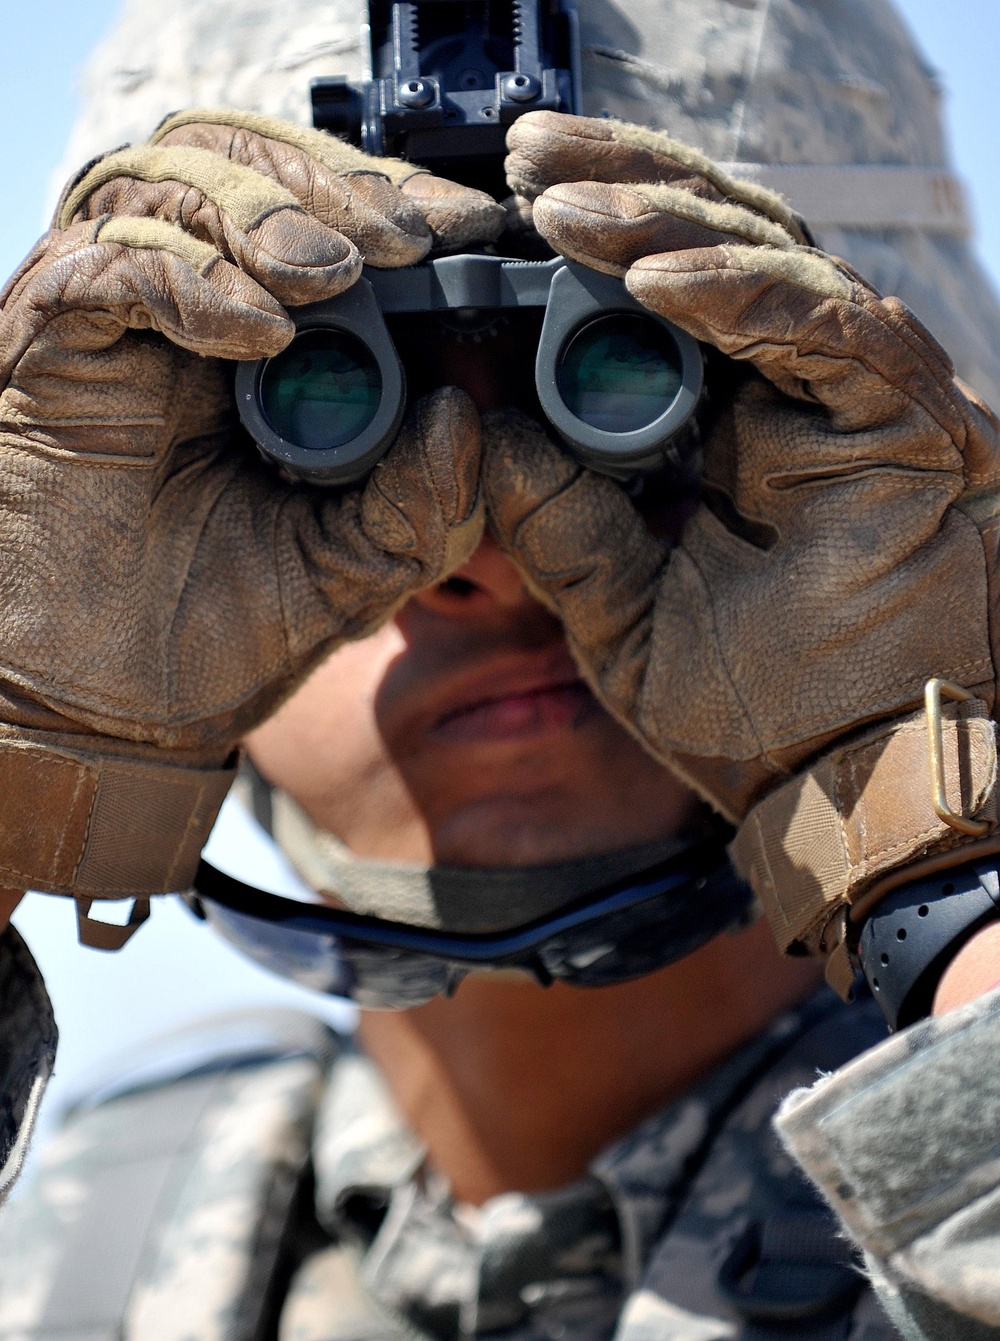 EOD airmen in Iraq prepare for an explosive battle in Afghanistan